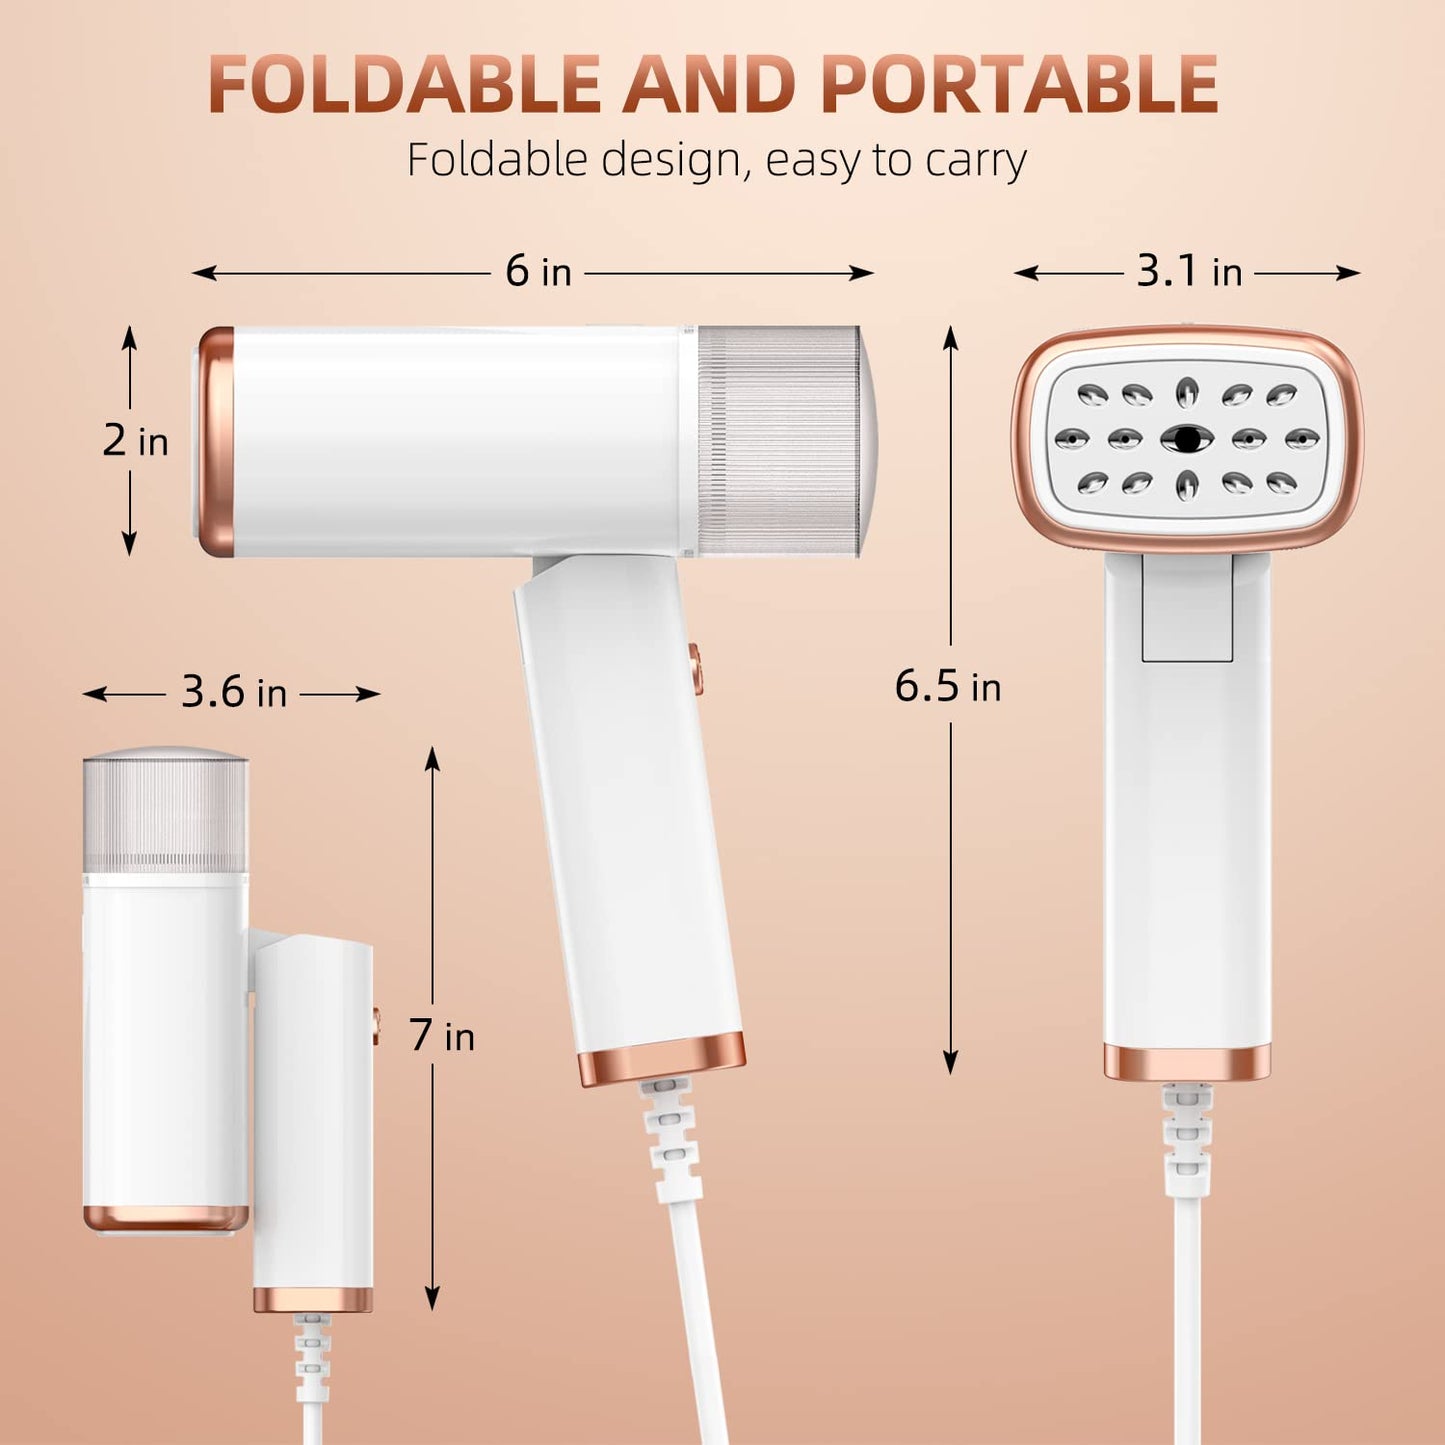 Portable Steamer for Clothes Foldable Clothing Wrinkles Remover,20 Sec Fast Heat-up, 1200W,120ml Water Tank,for Home Travel,only for 120V Countries, Not for 220V Such as Europe